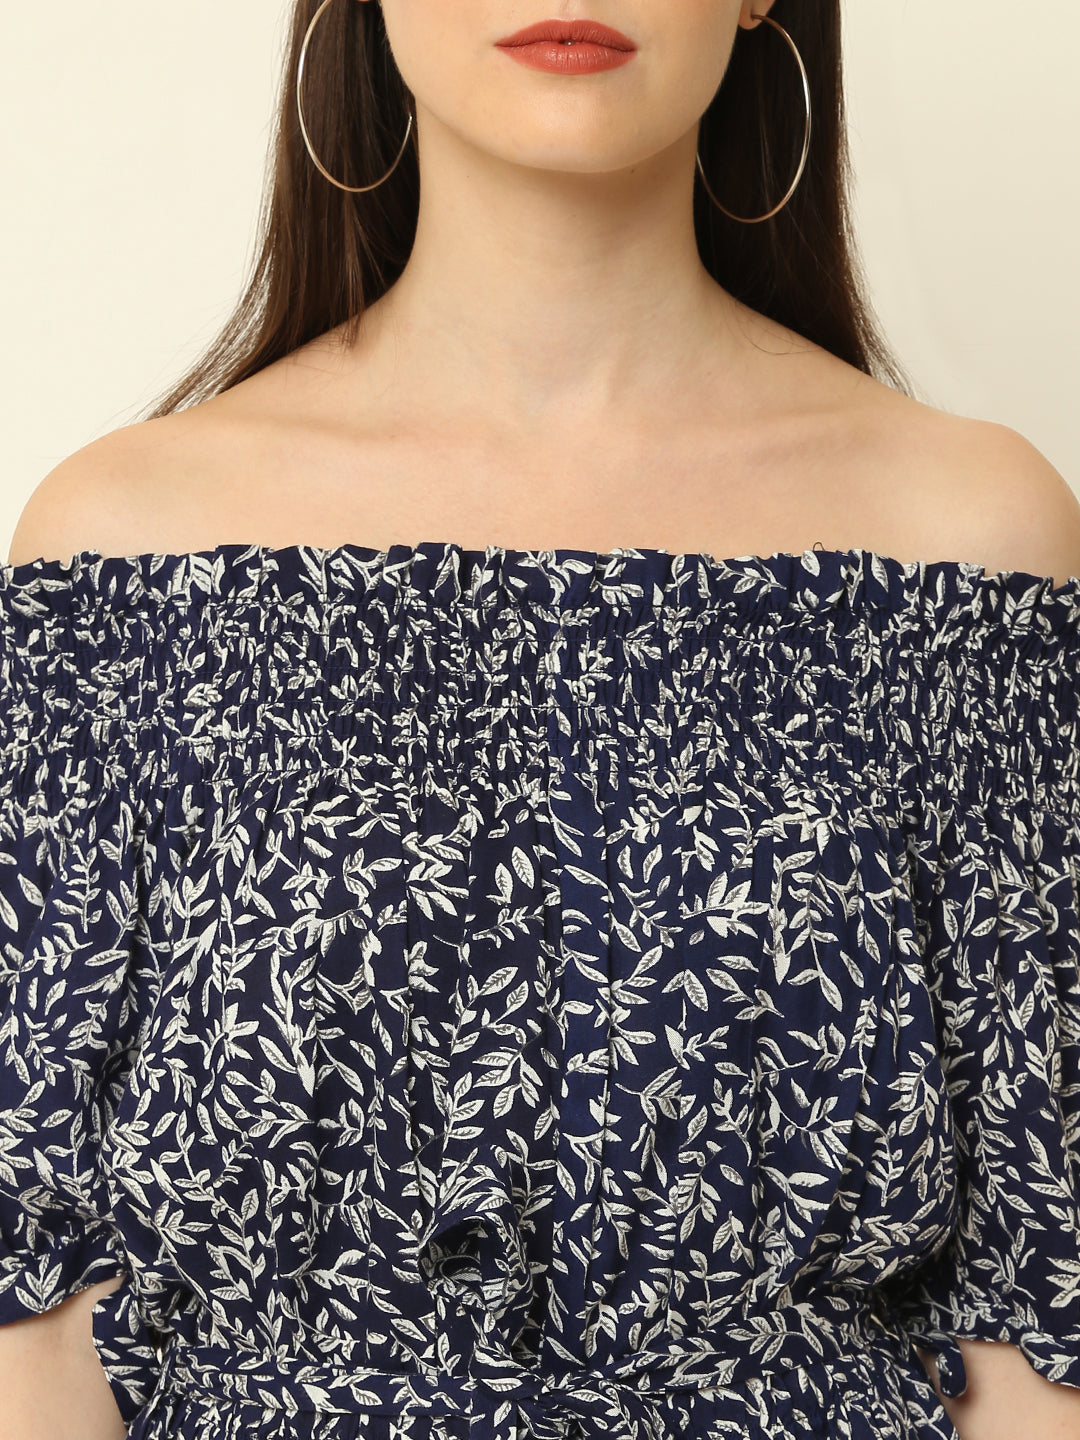 Blue Leaves Printed Off Shoulder High Low One Piece Dress